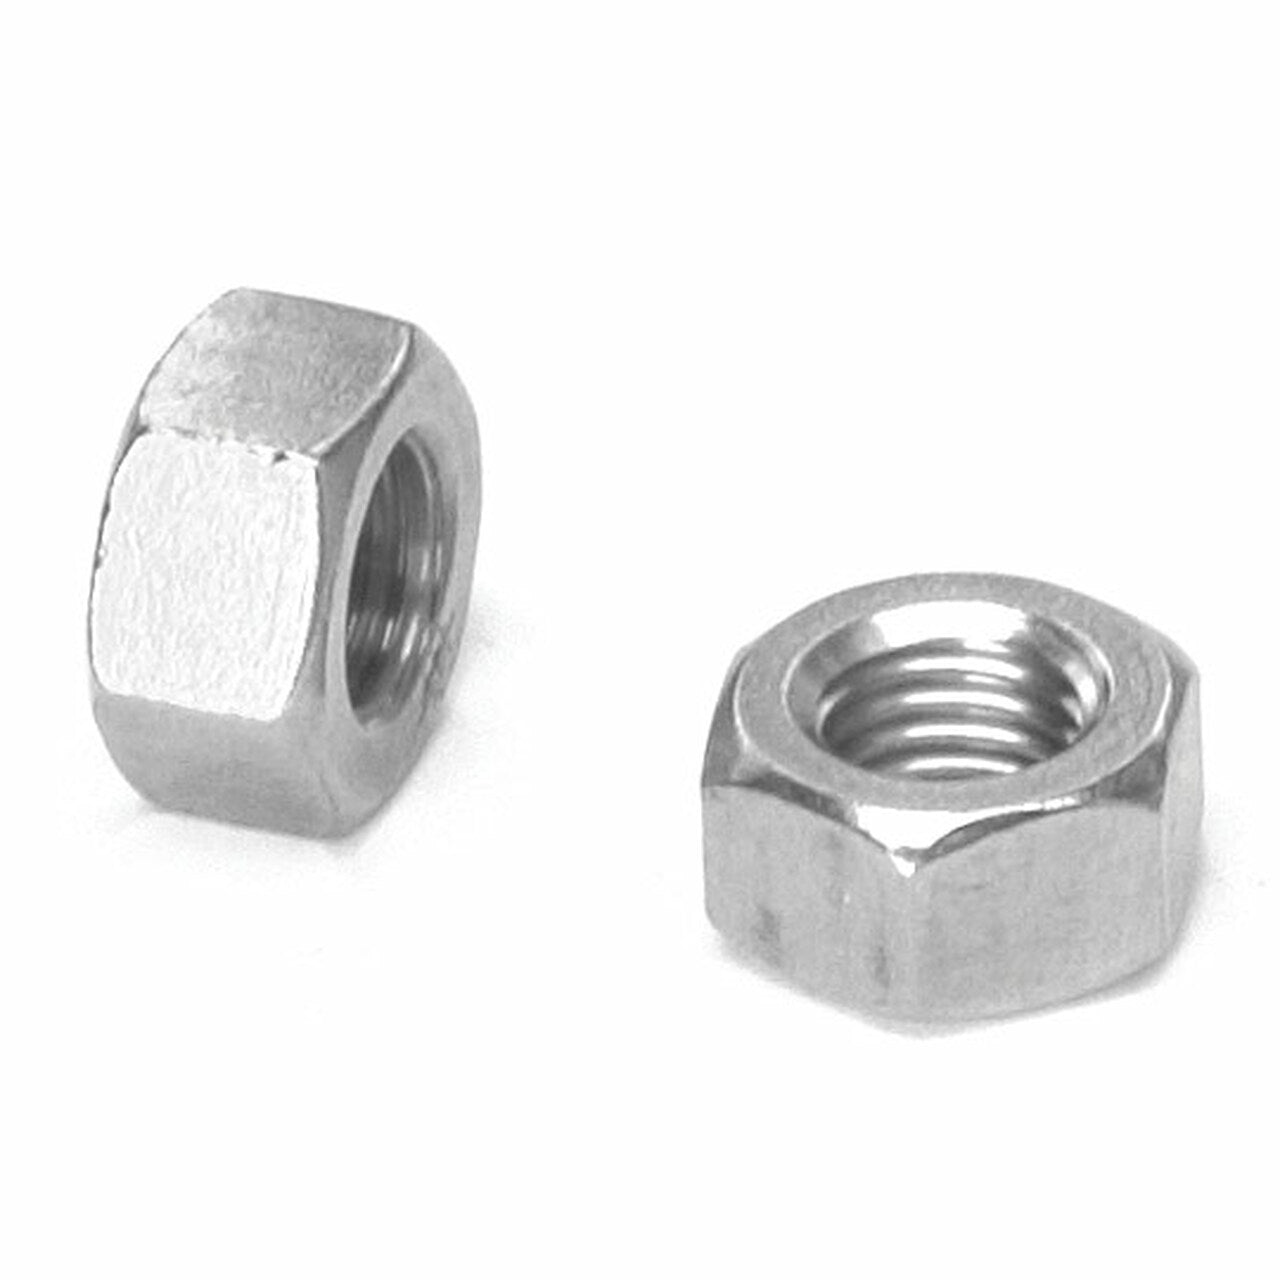 Standard Fasteners - 304 Stainless Steel Nuts, Part No. 1/2-13